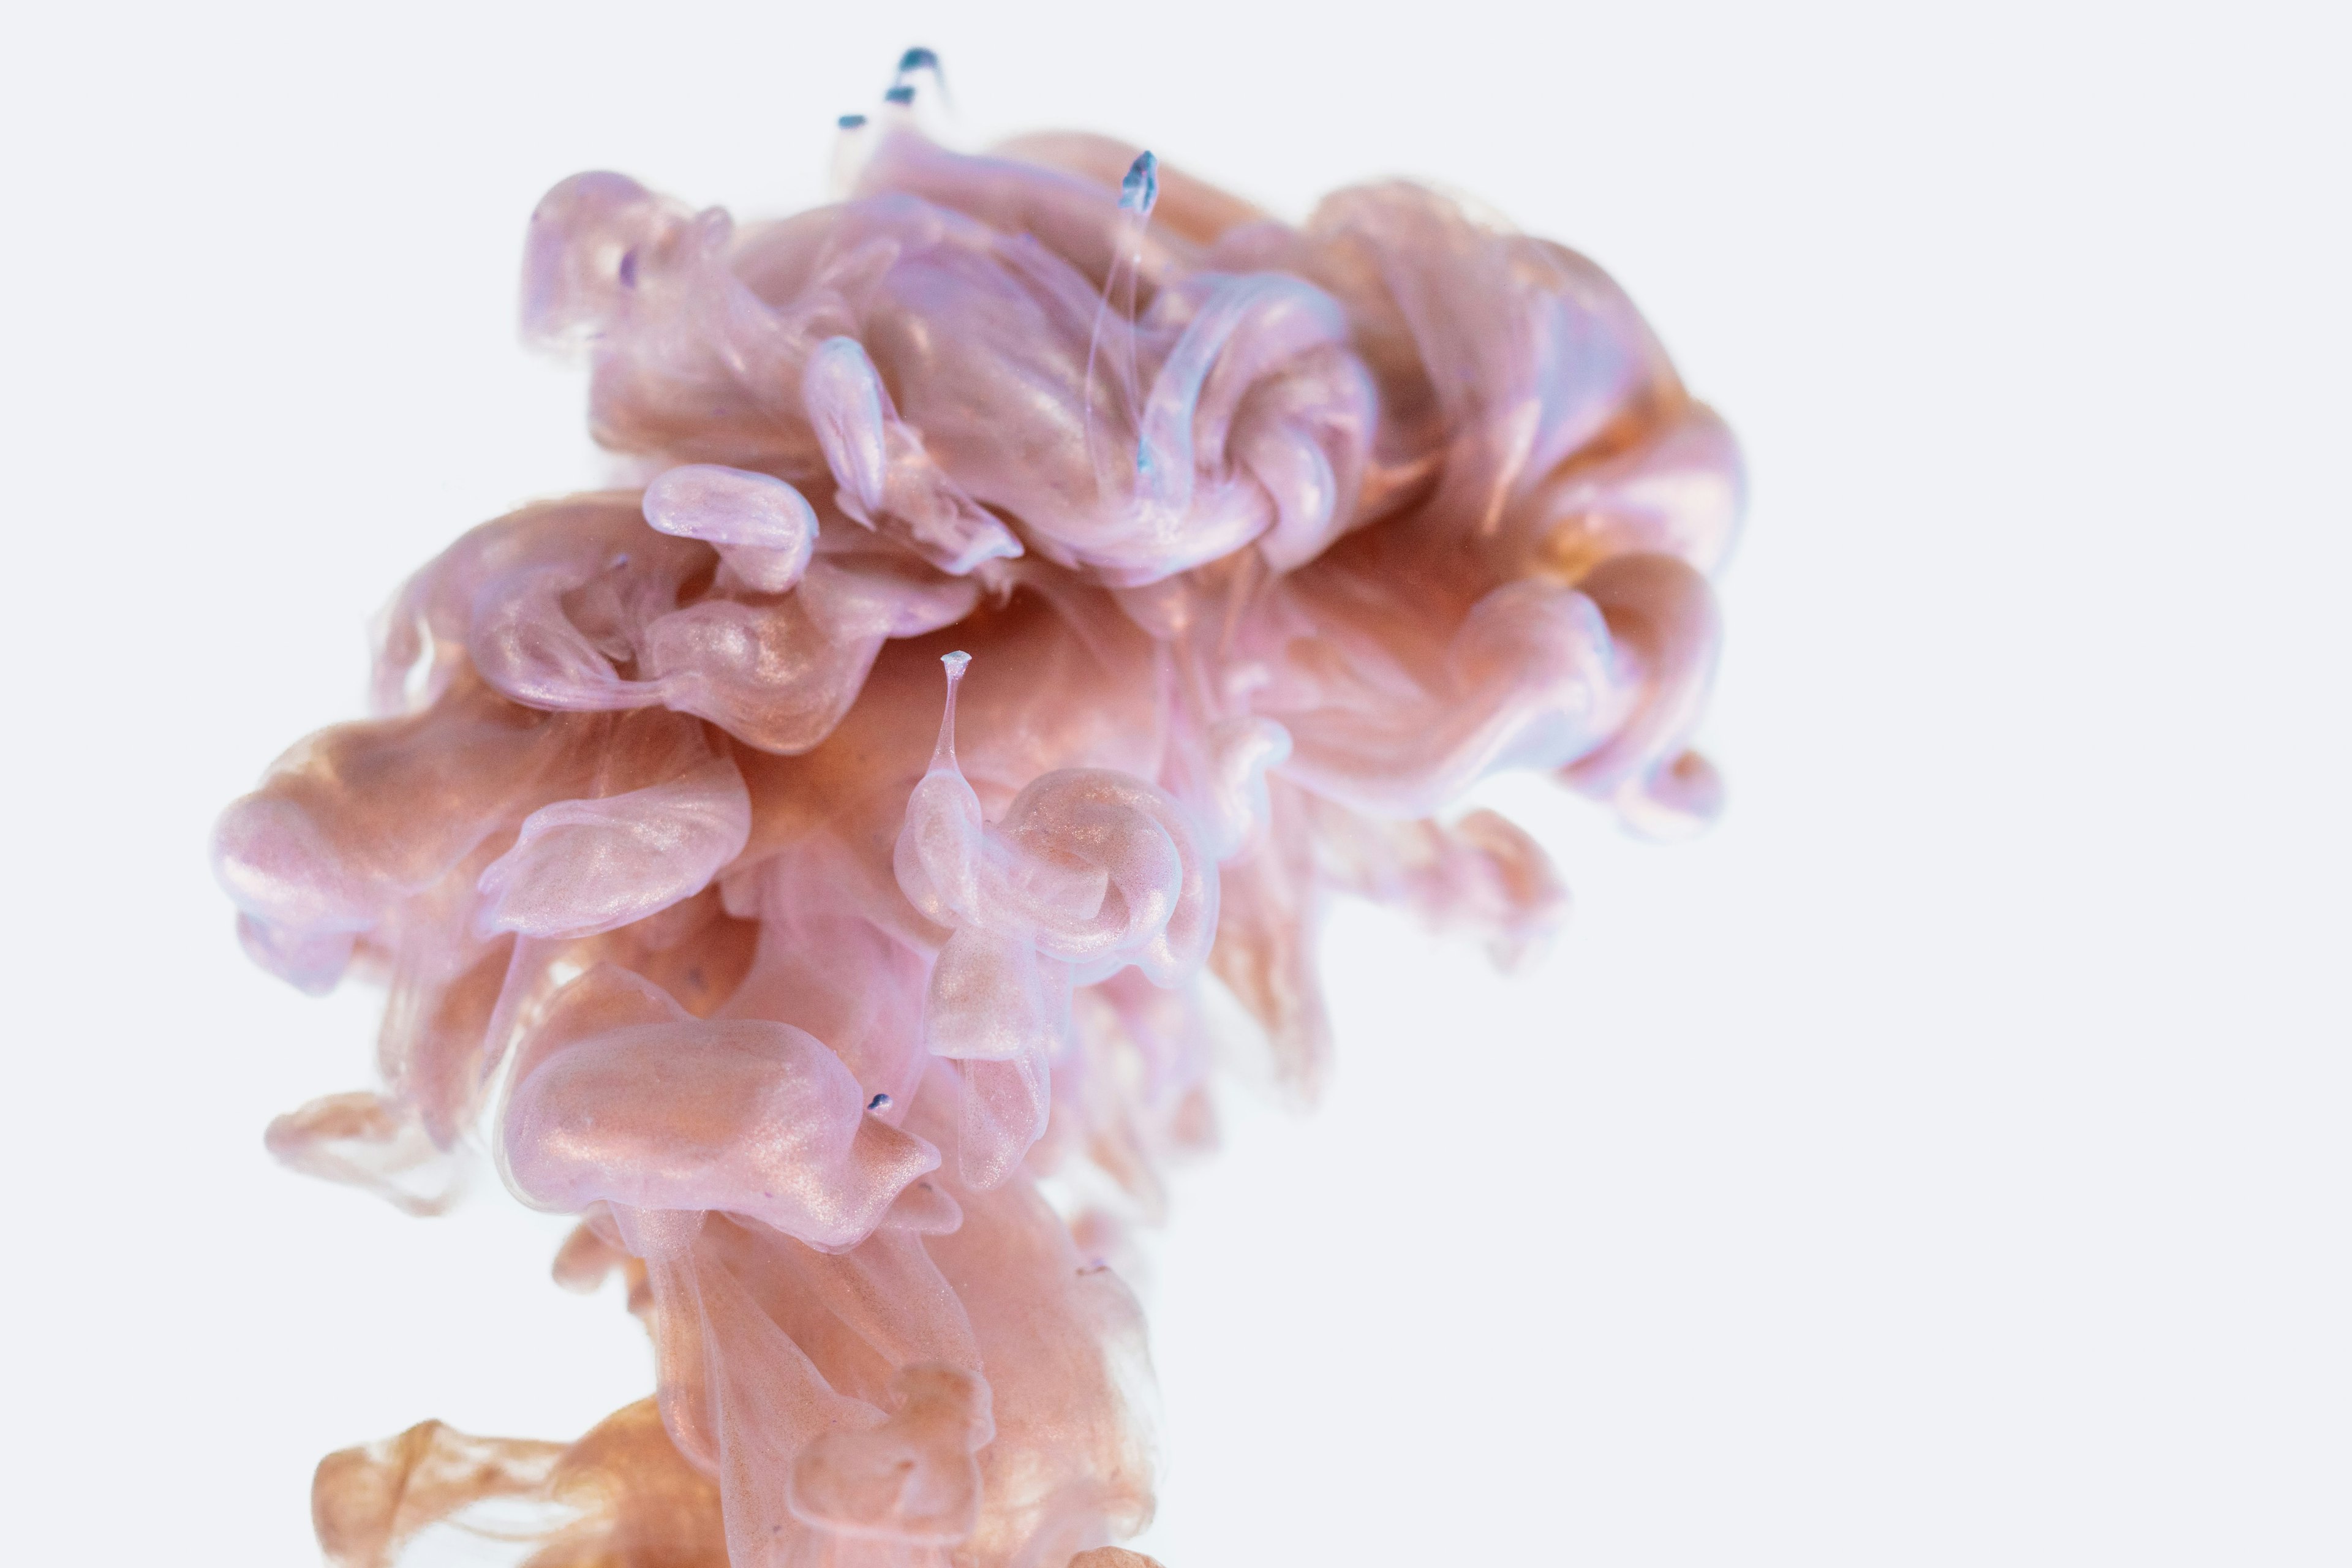 a plume of something pink that looks like a brain on a white background